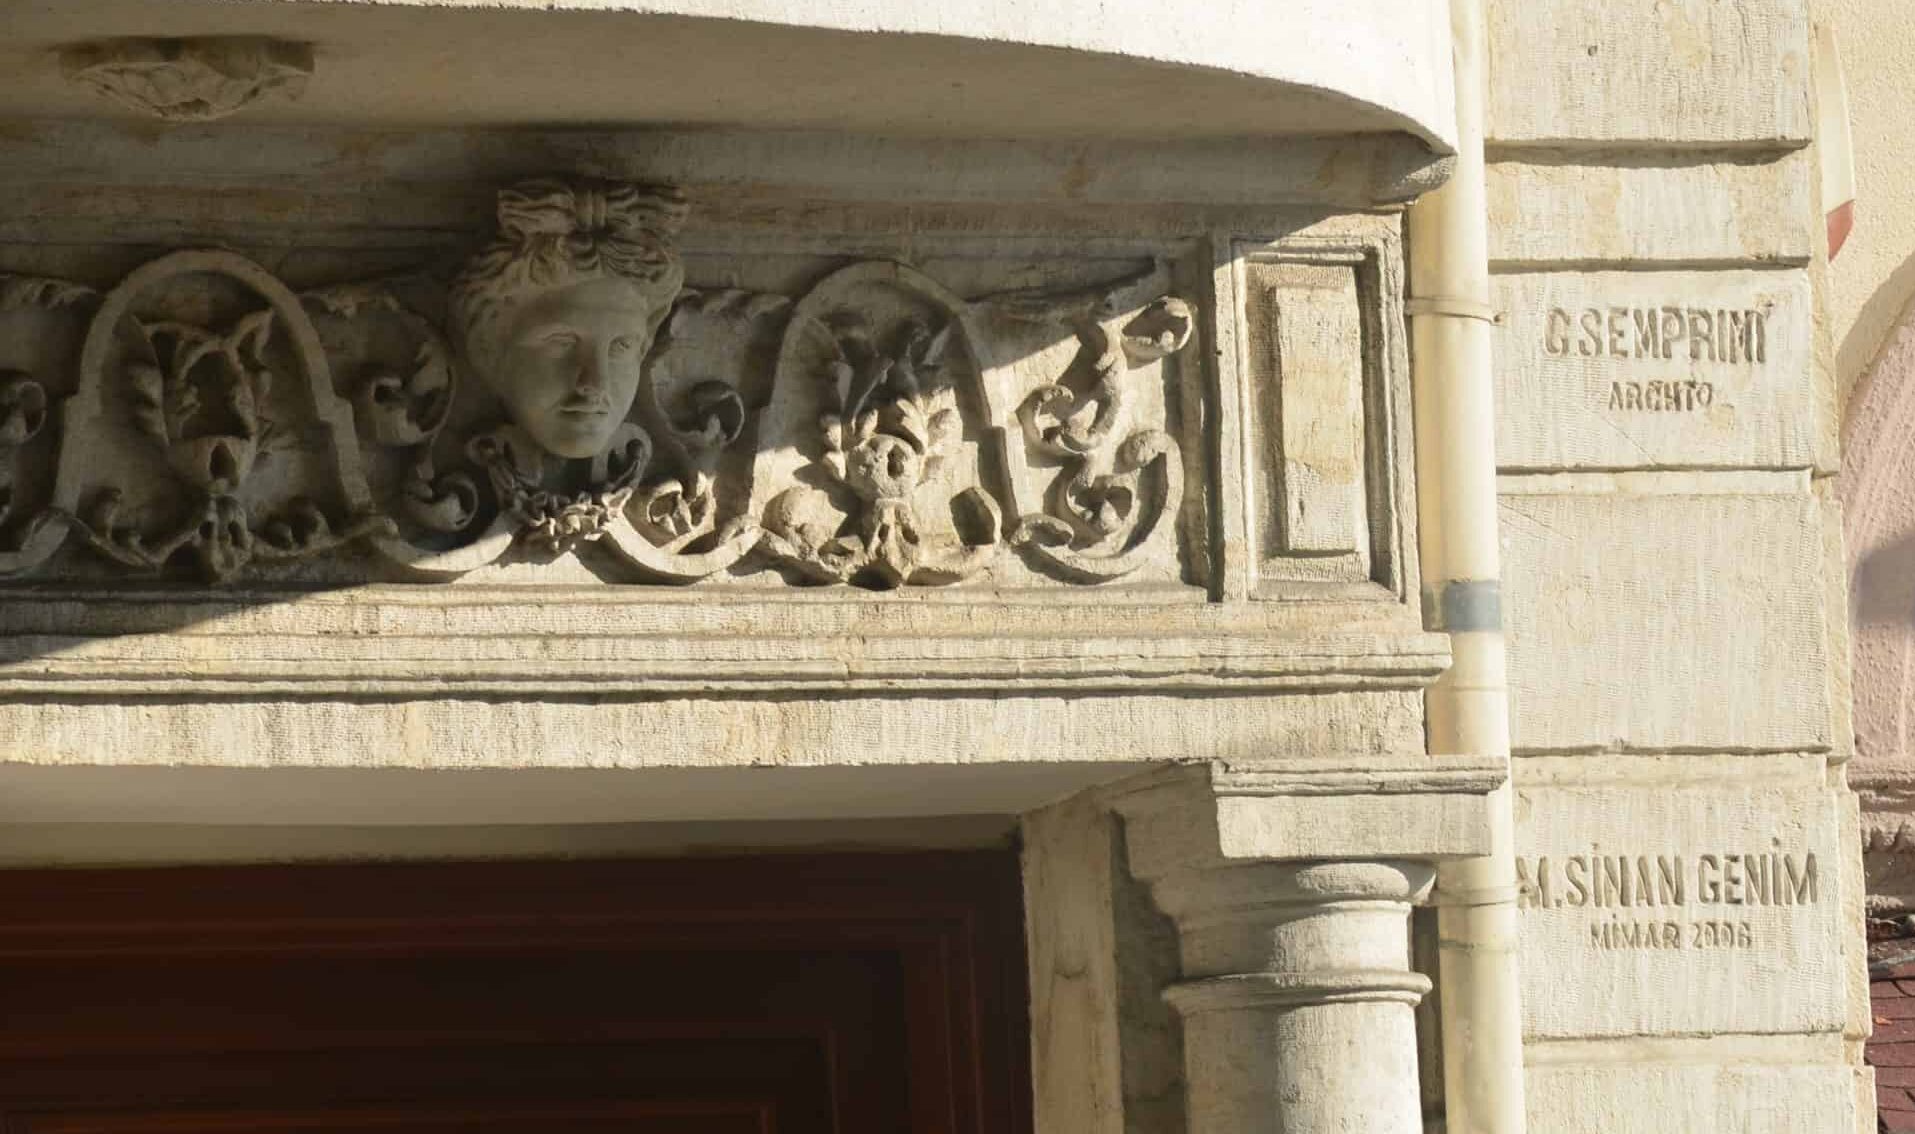 Architects's signature and ornamental stonework on the Istanbul Research Institute in Tepebaşı, Istanbul, Turkey